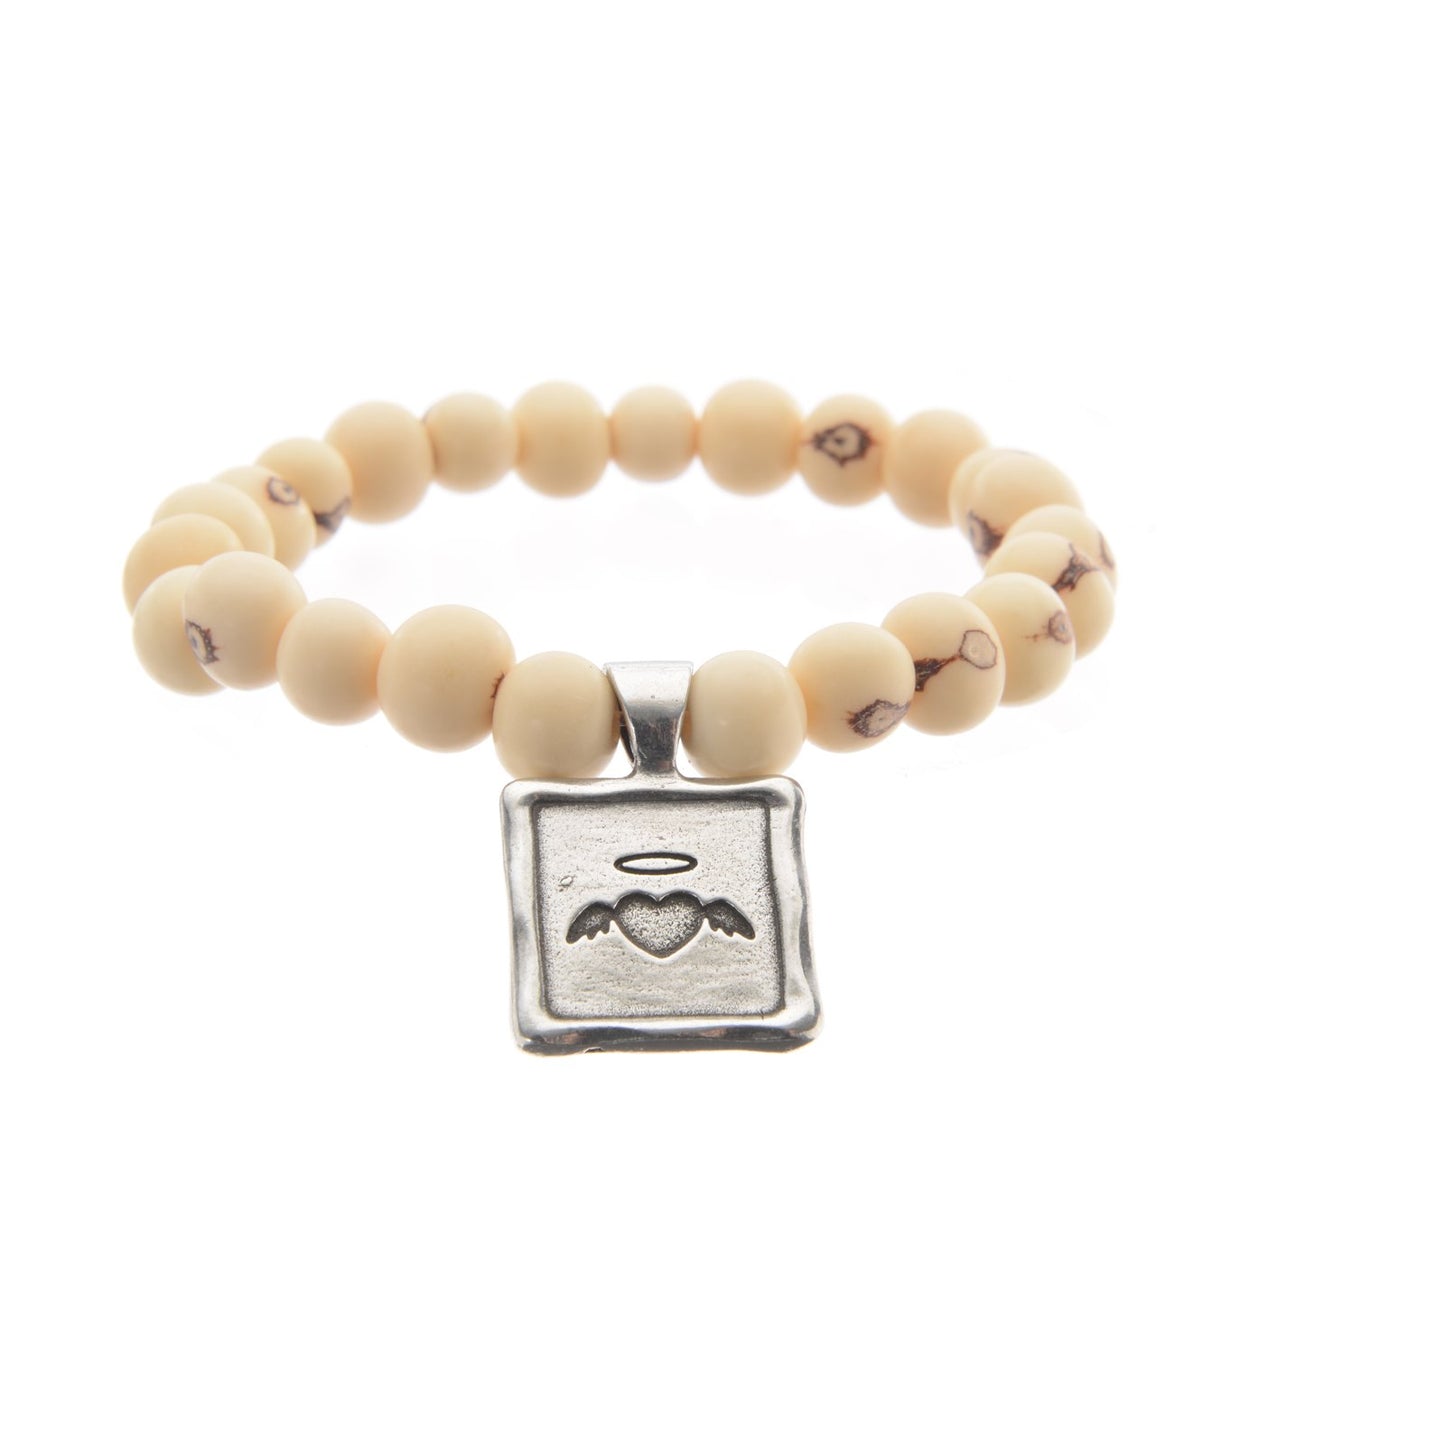 Acai Seeds Of Life Bracelet with Wax Seal - White